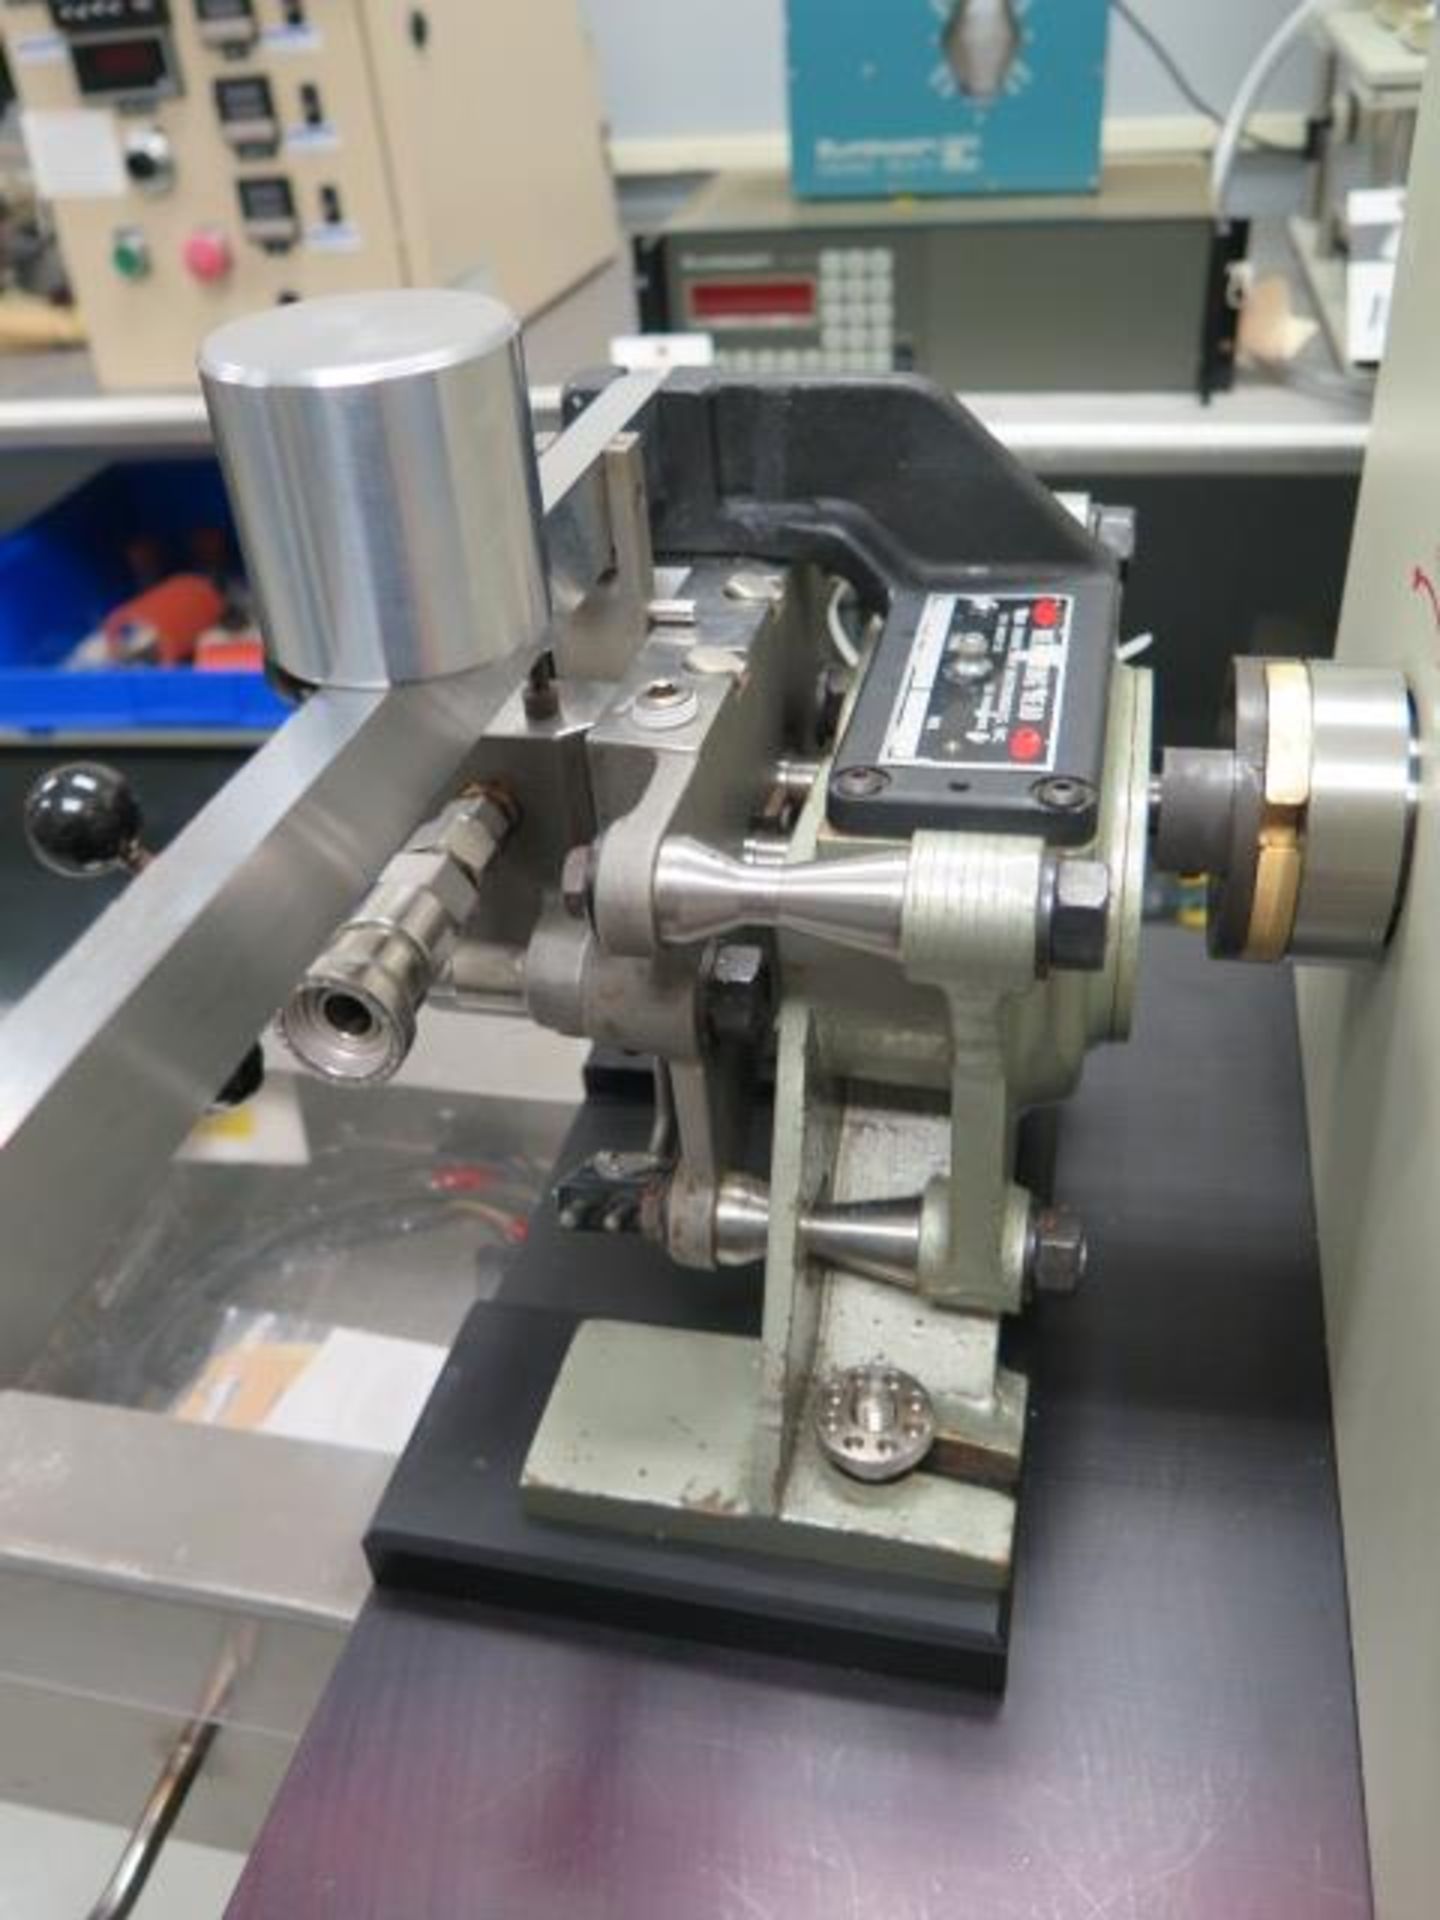 Brabender Prep-Center Type 08-13-000 Extruder s/n 765-ABB w/ R.E.O.-6/2 Measuring Head (Tests Proces - Image 6 of 10